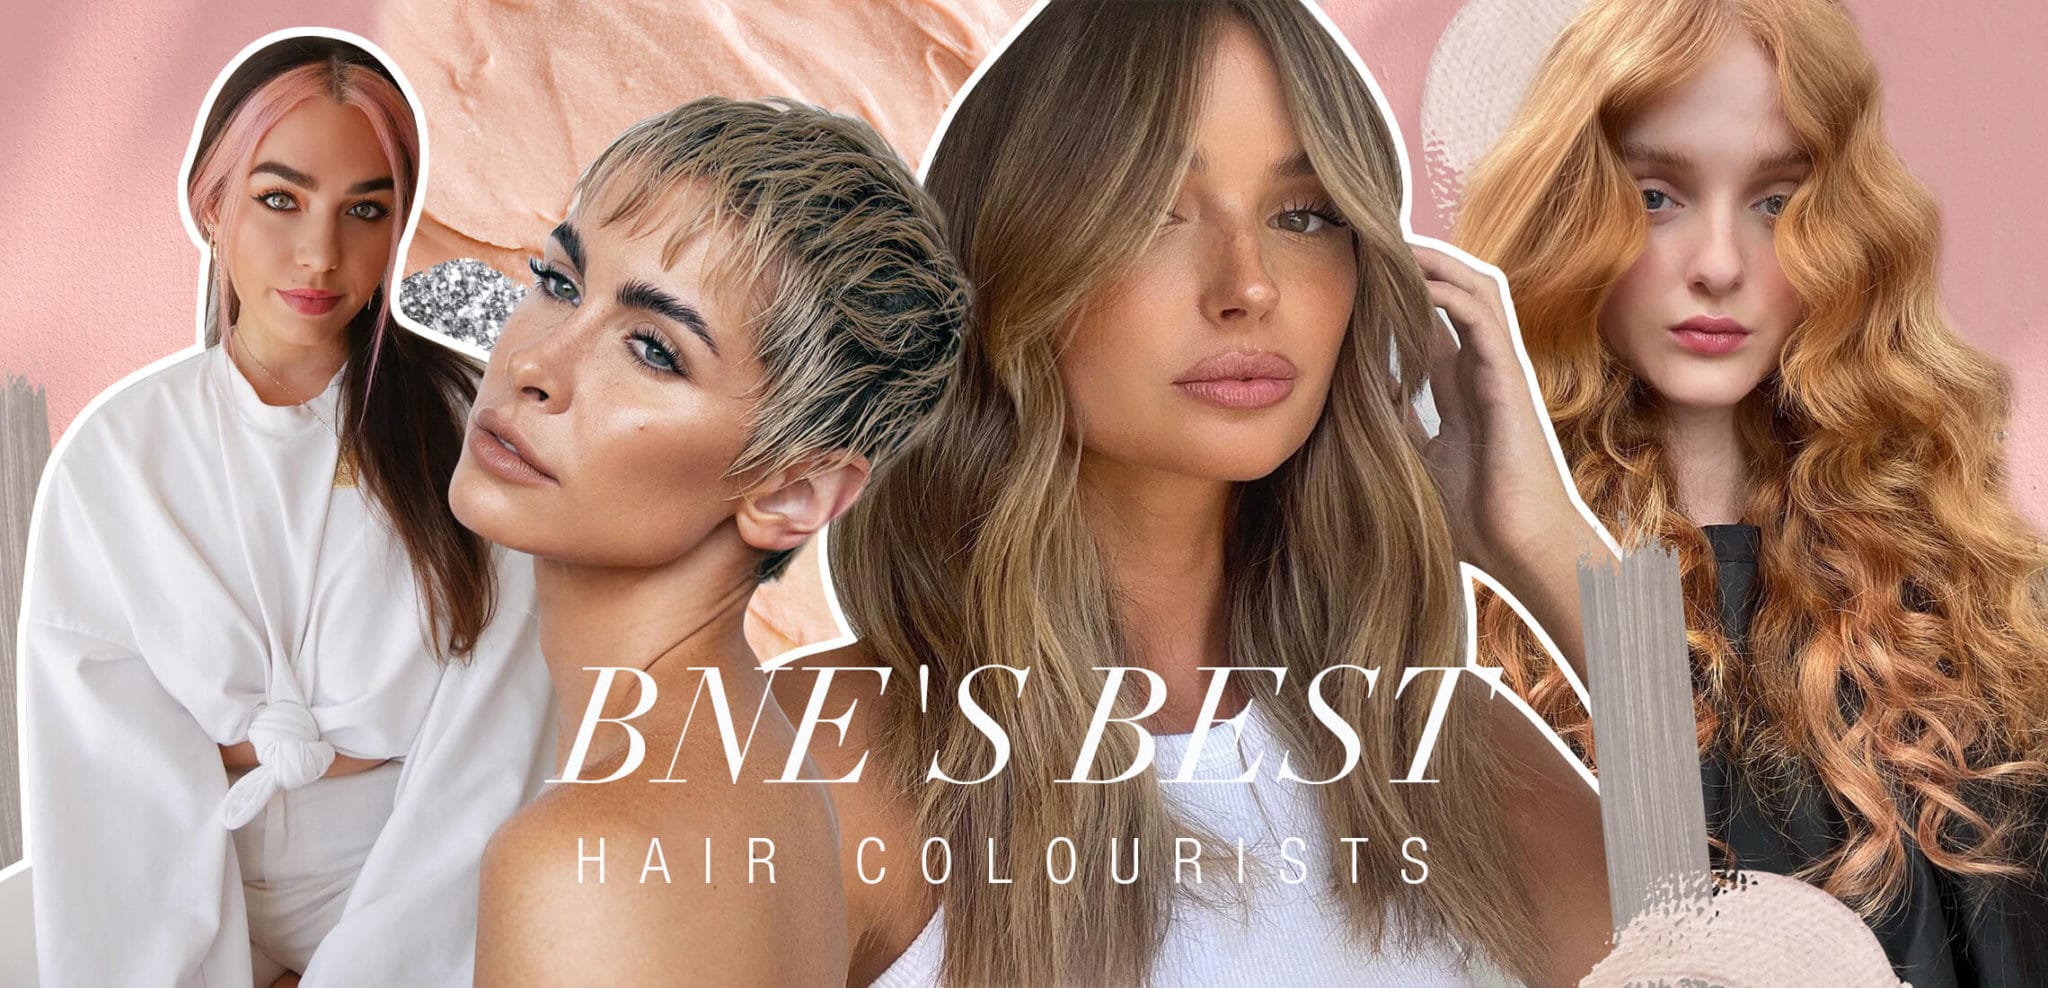 Style Magazines / 2021: Brisbane's Best Hair Colourists - Co and Pace Salons